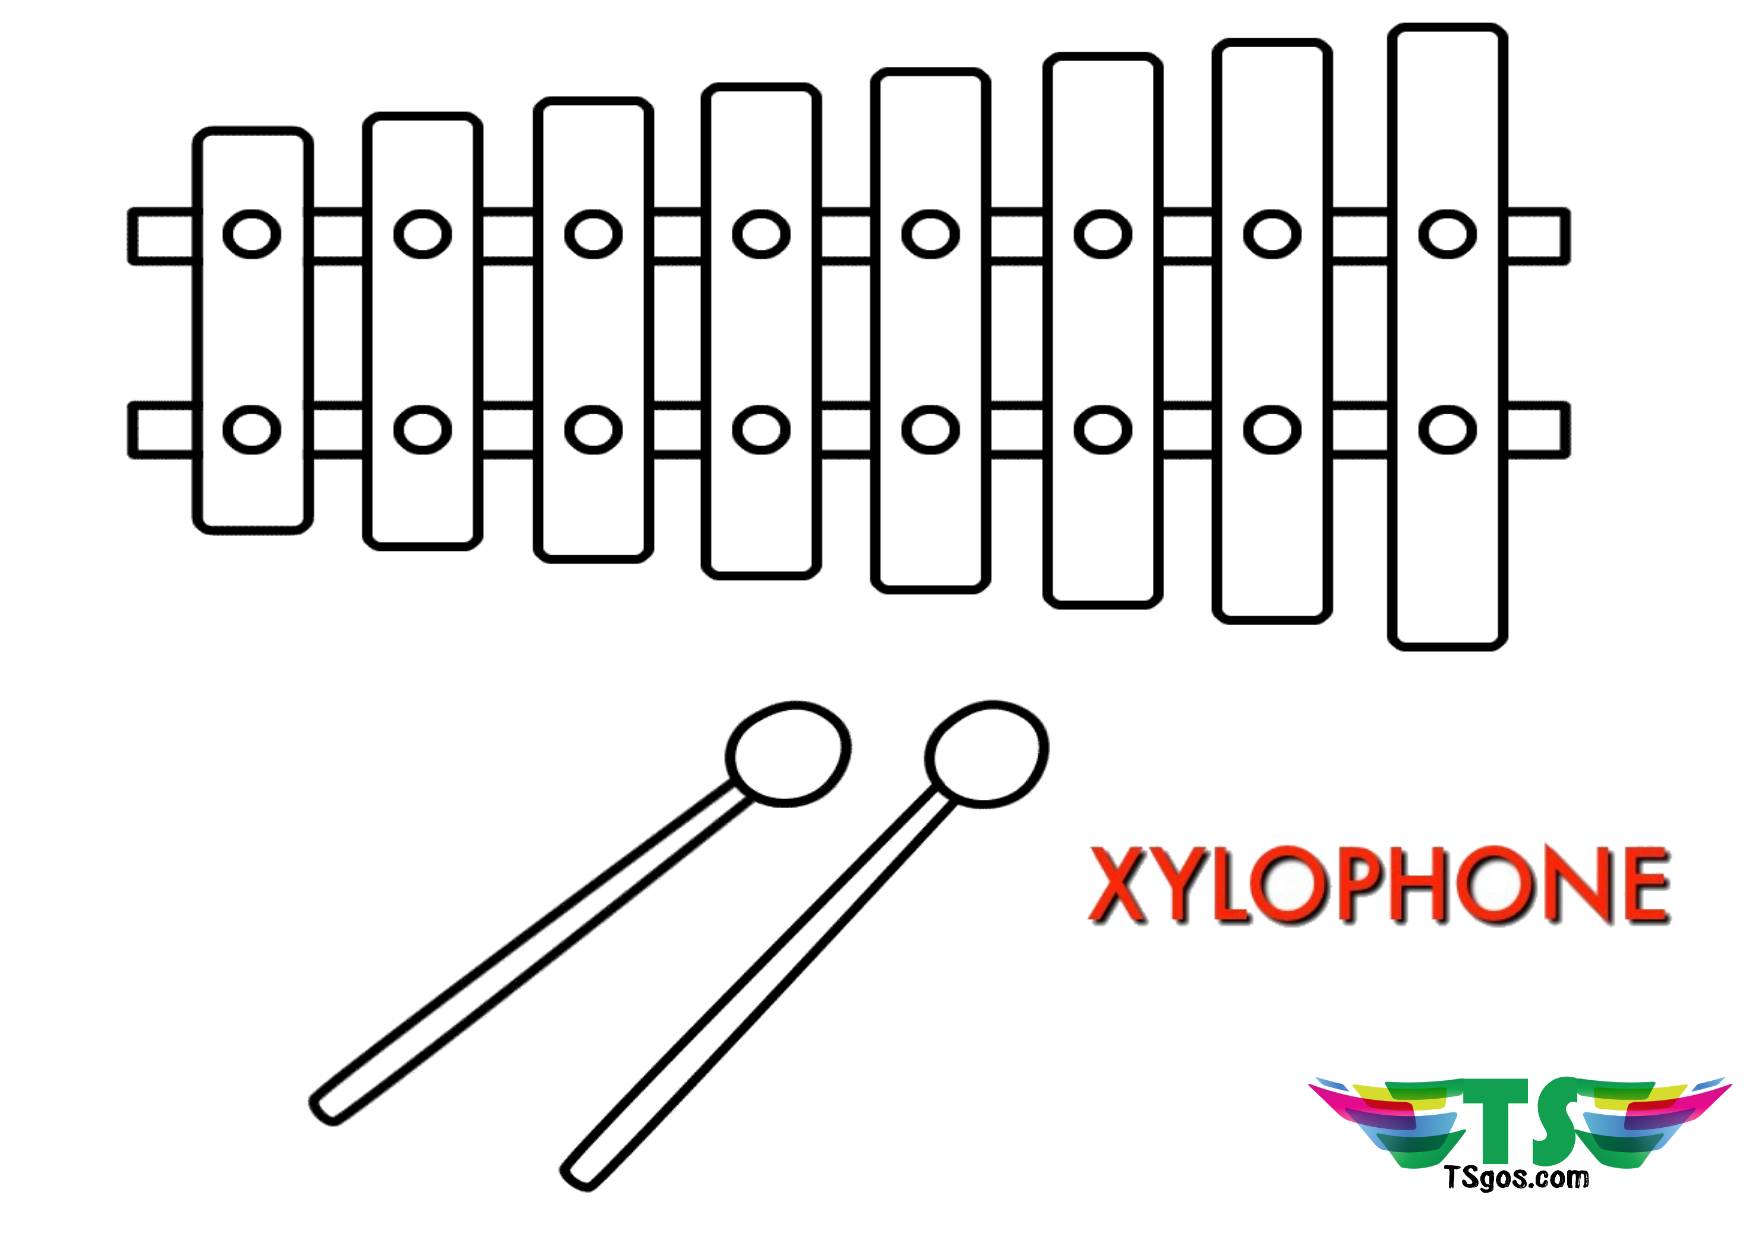 Xylophone musical instruments printable coloring pages for kids - TSgos.com